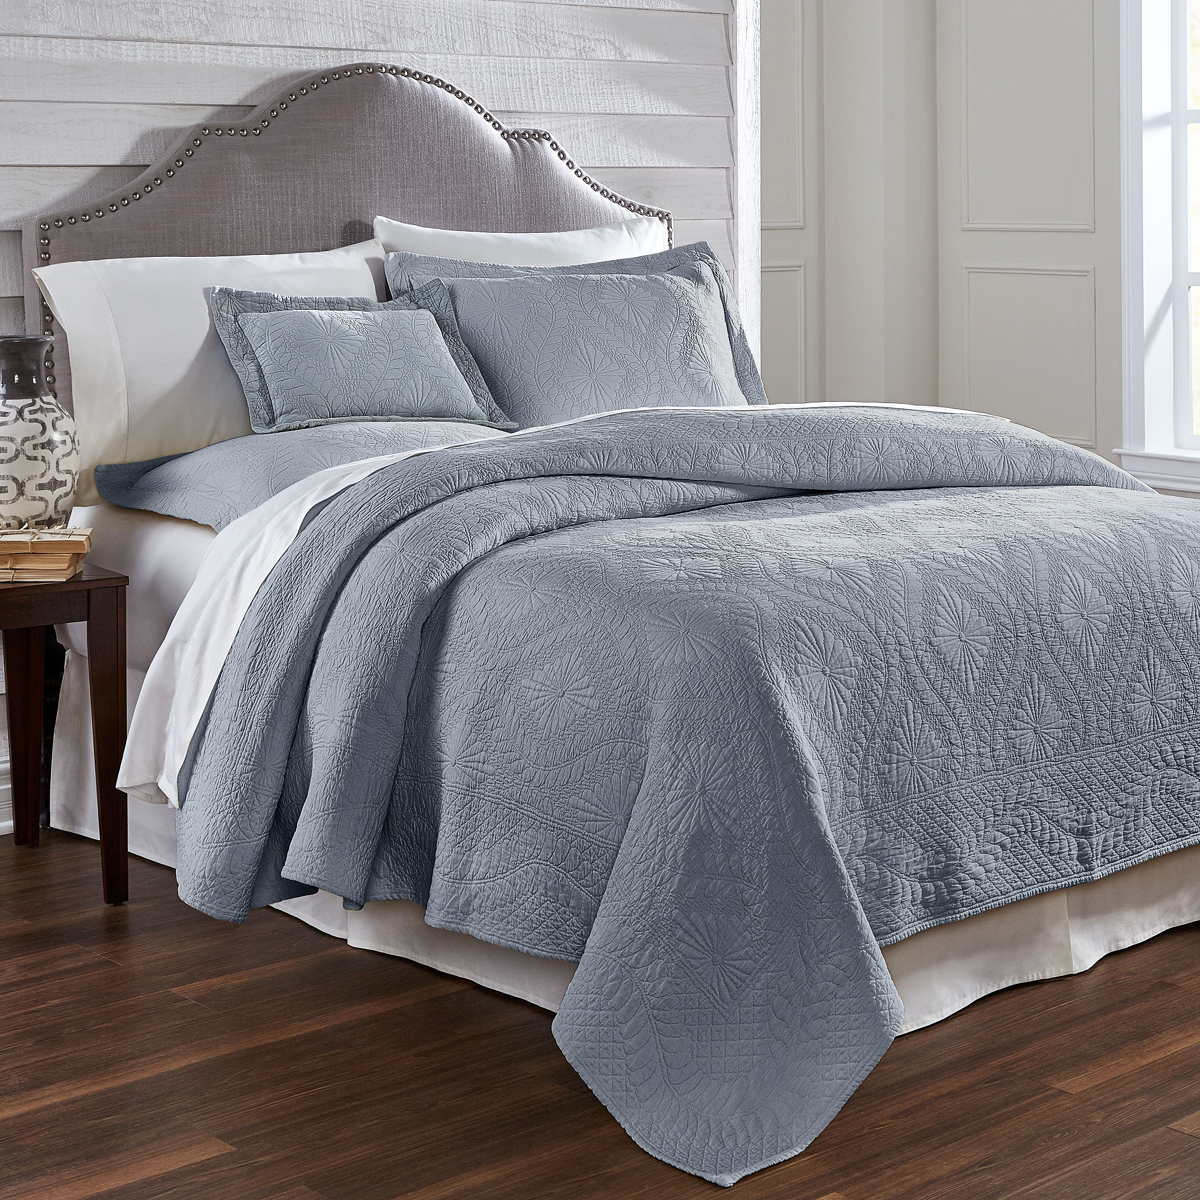 *Traditions Linens Bedding Suzi Matelasse Coverlet and Shams